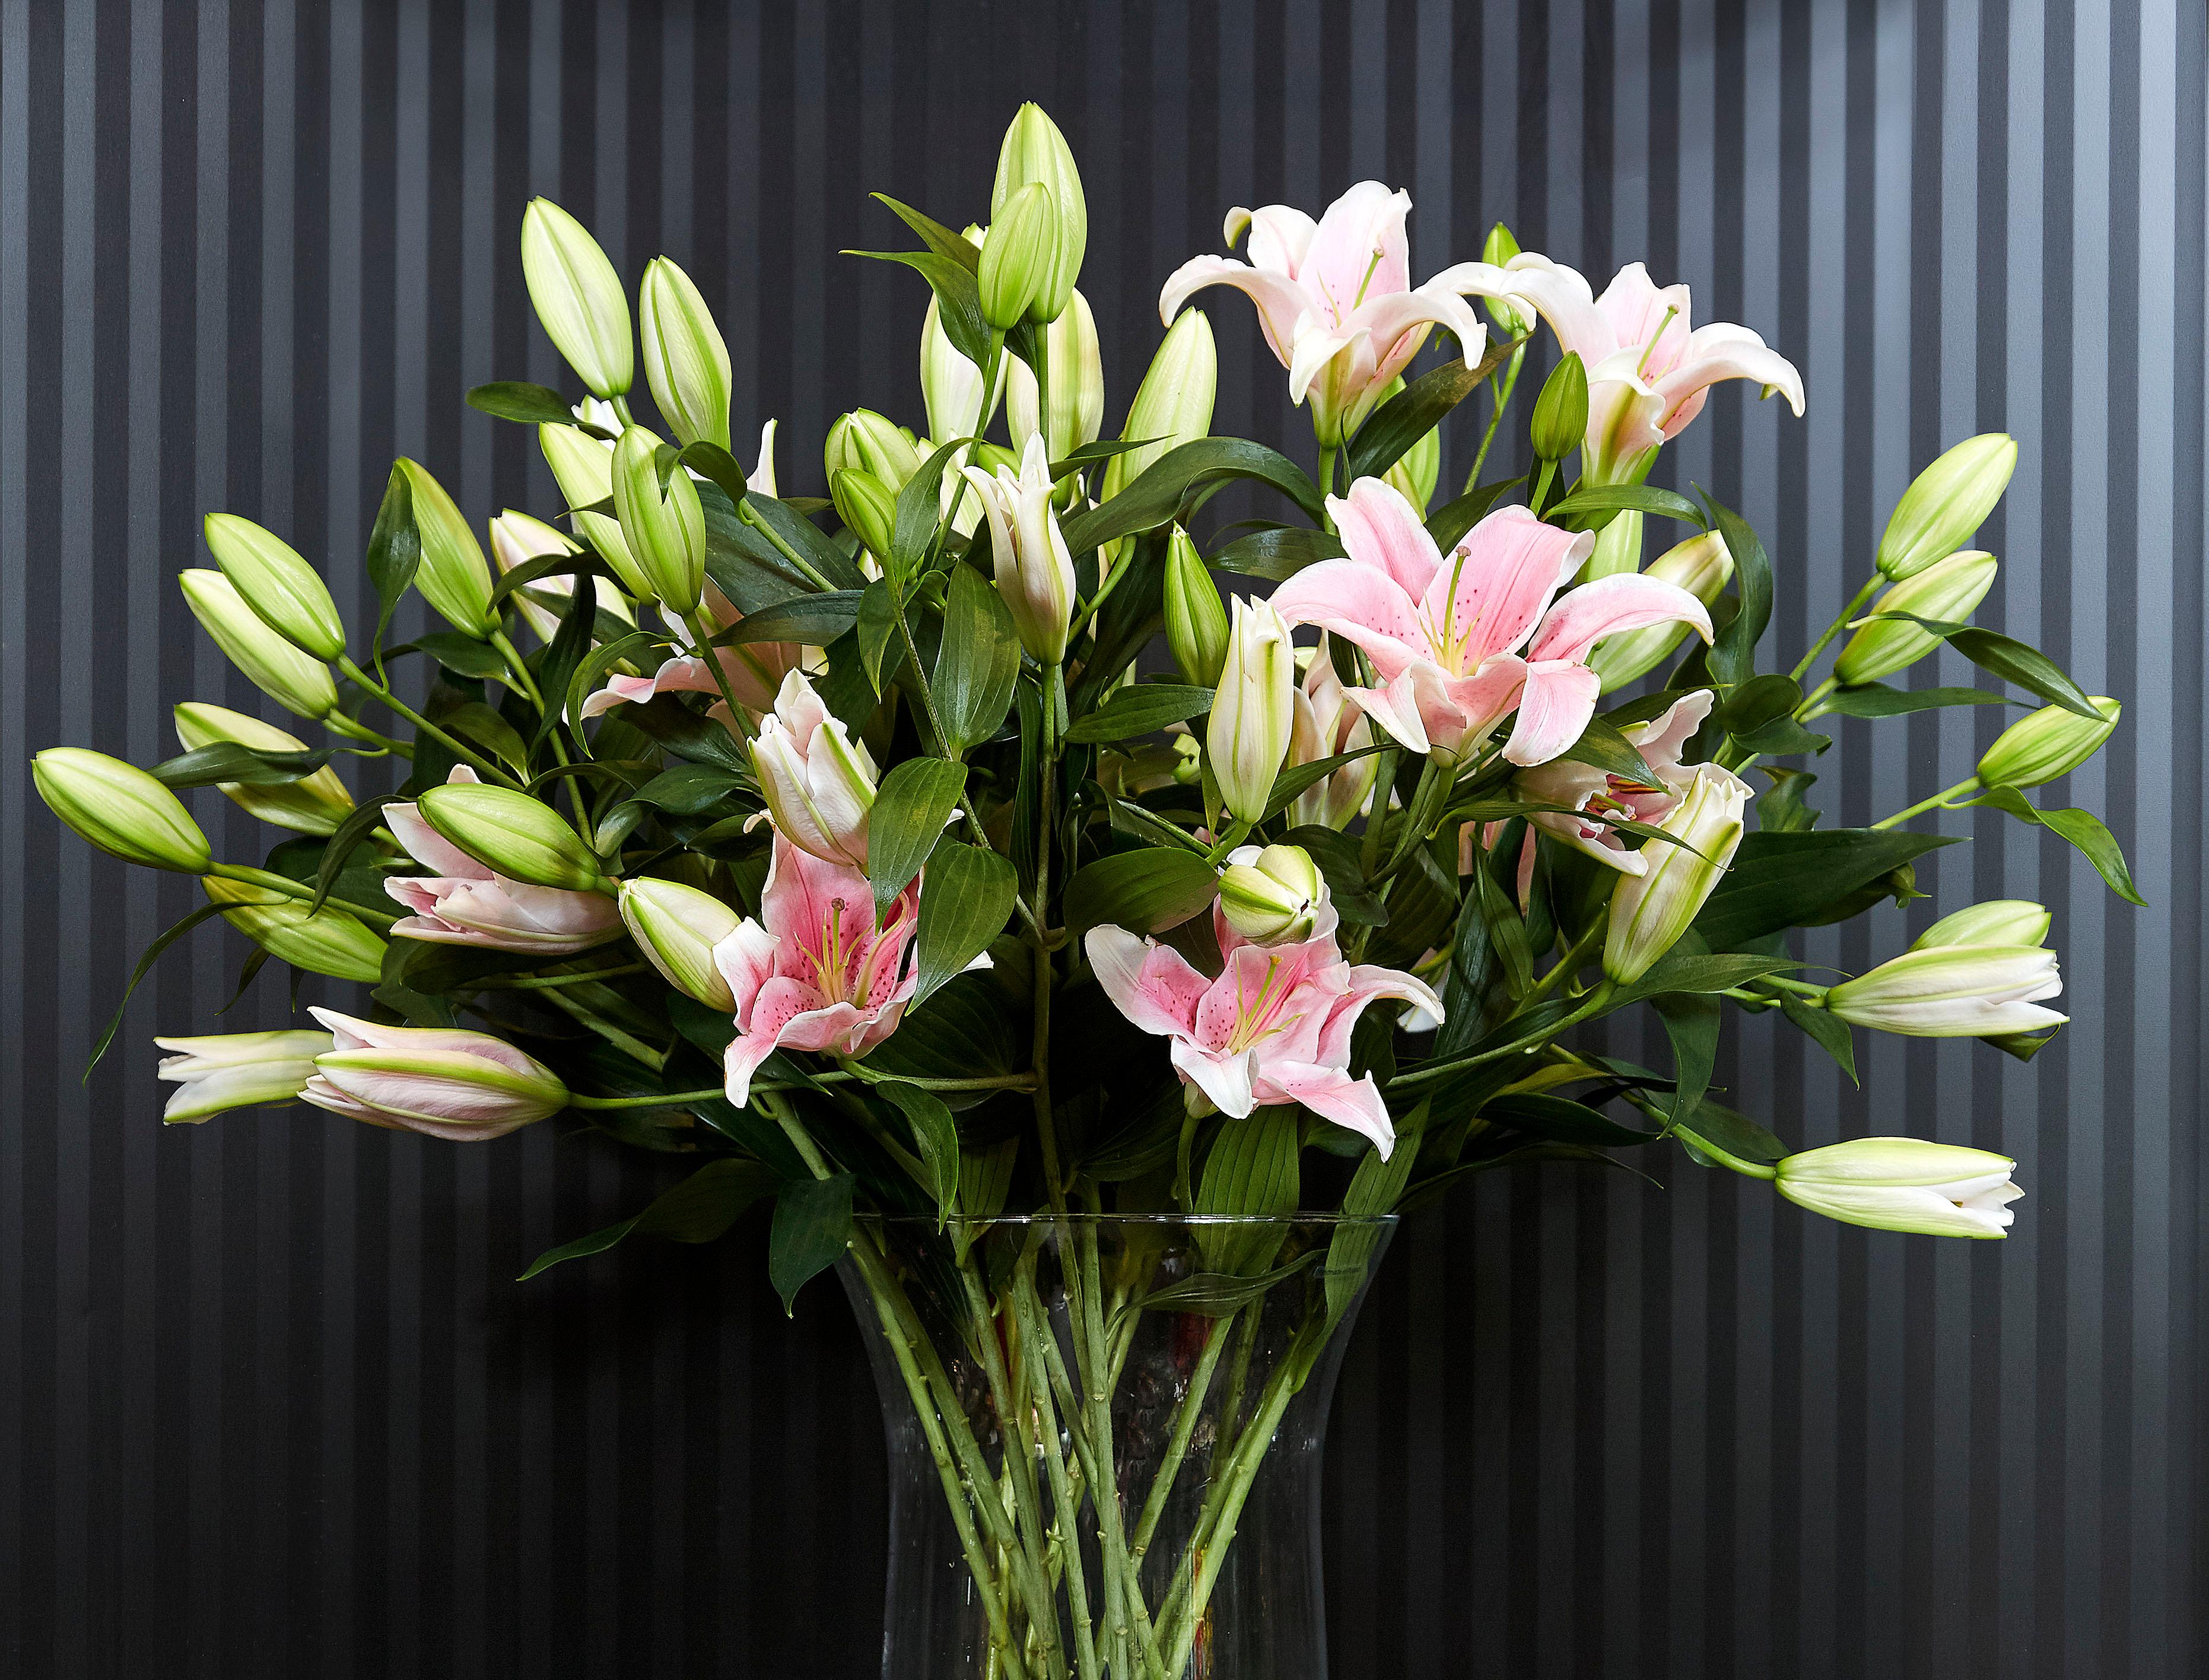 A glass vase filled with blooming pink lillies.